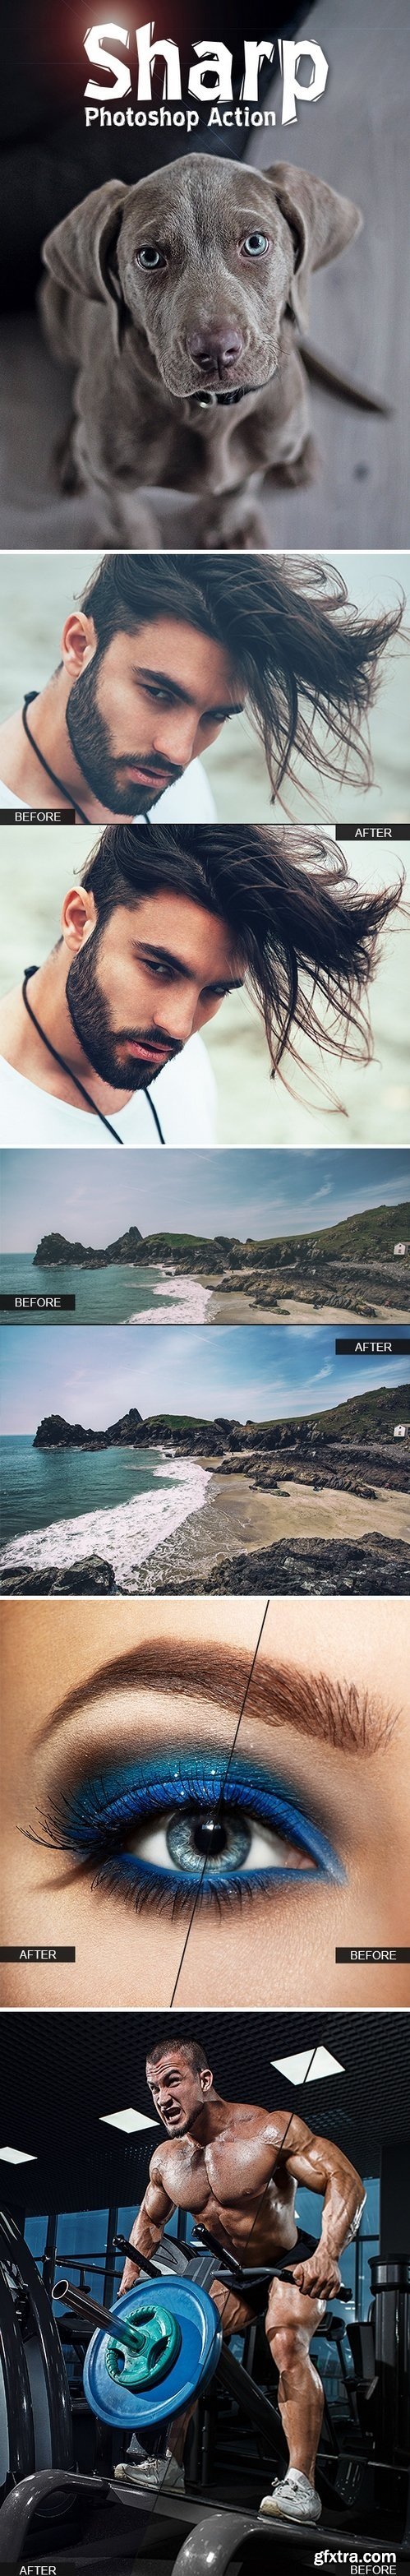 Graphicriver - Sharp HDR Photoshop Action 17781133